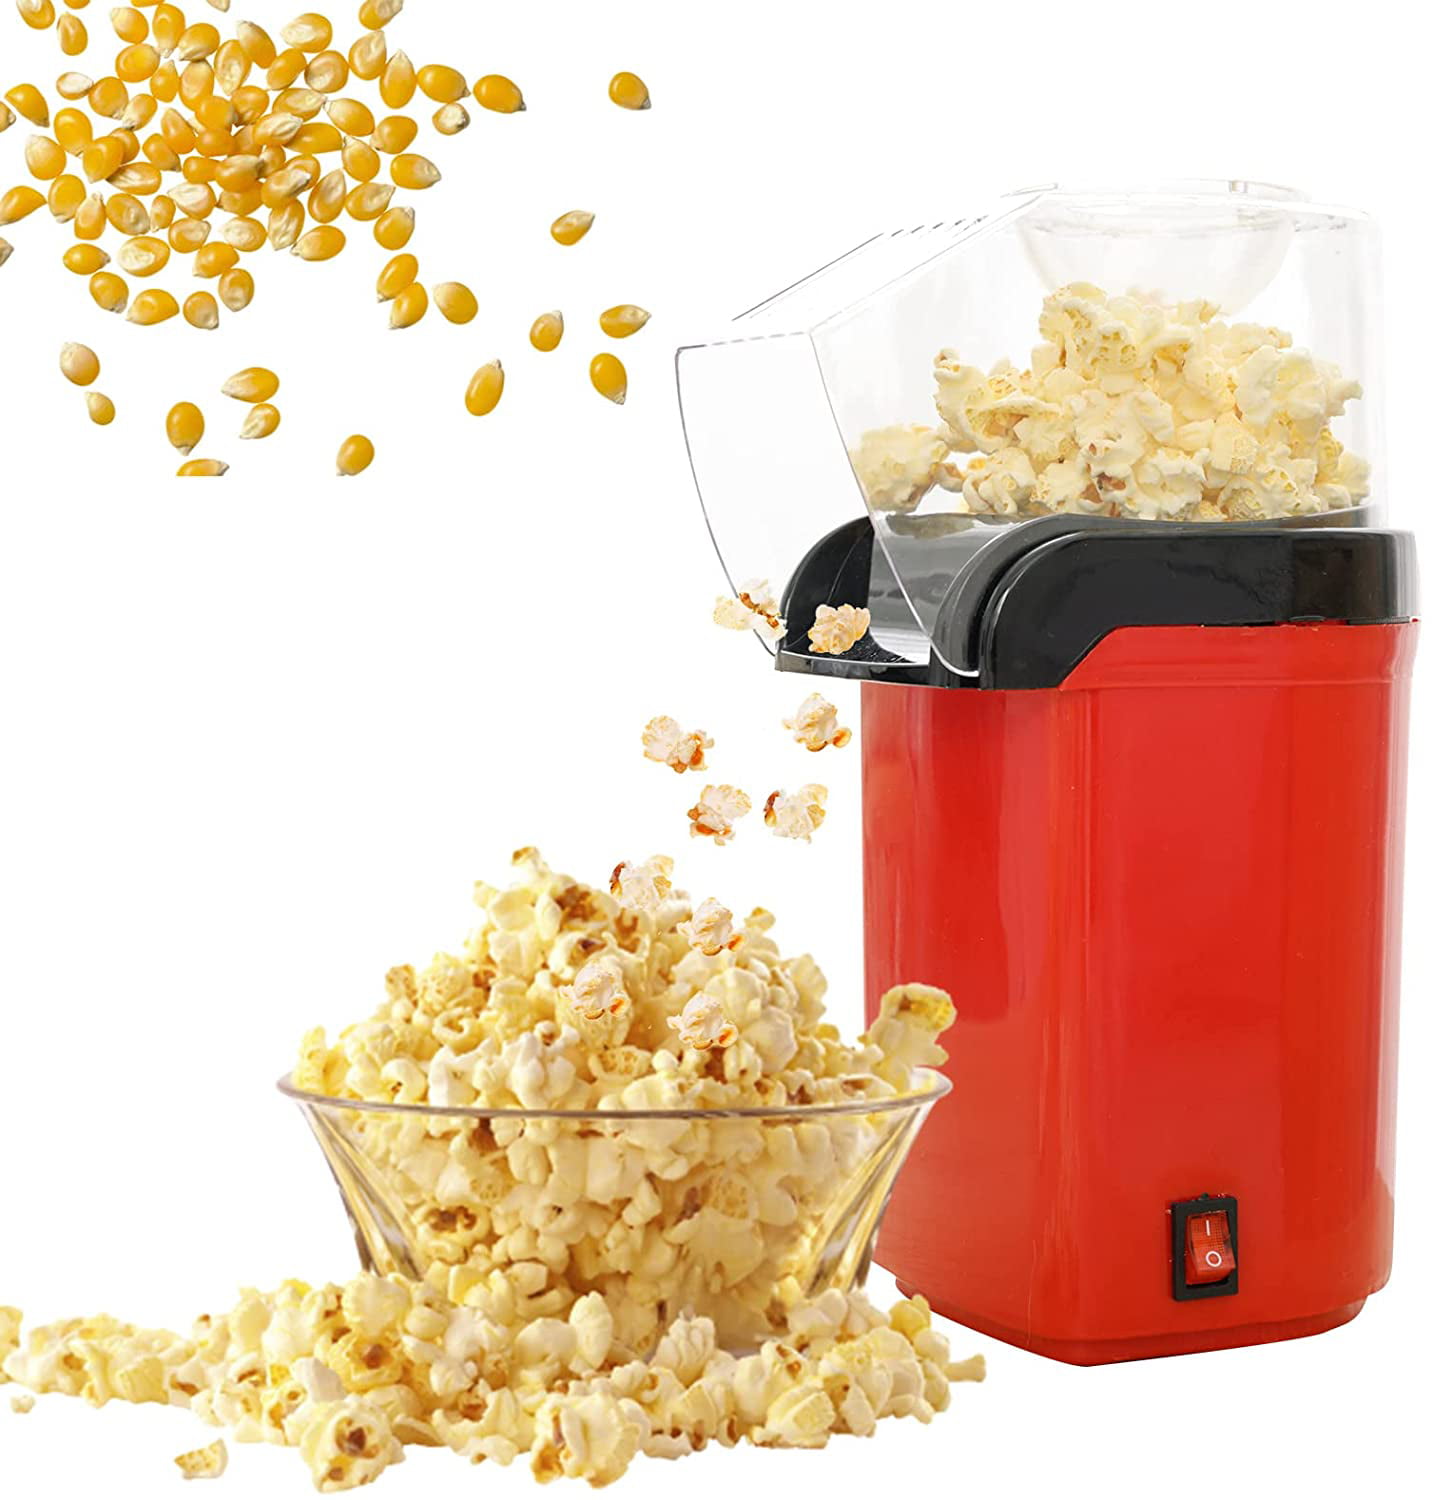 Hot Air Popcorn Poppers for Home 1200W Popcorn Maker Machine for Healthy Snack No Oil Needed black 